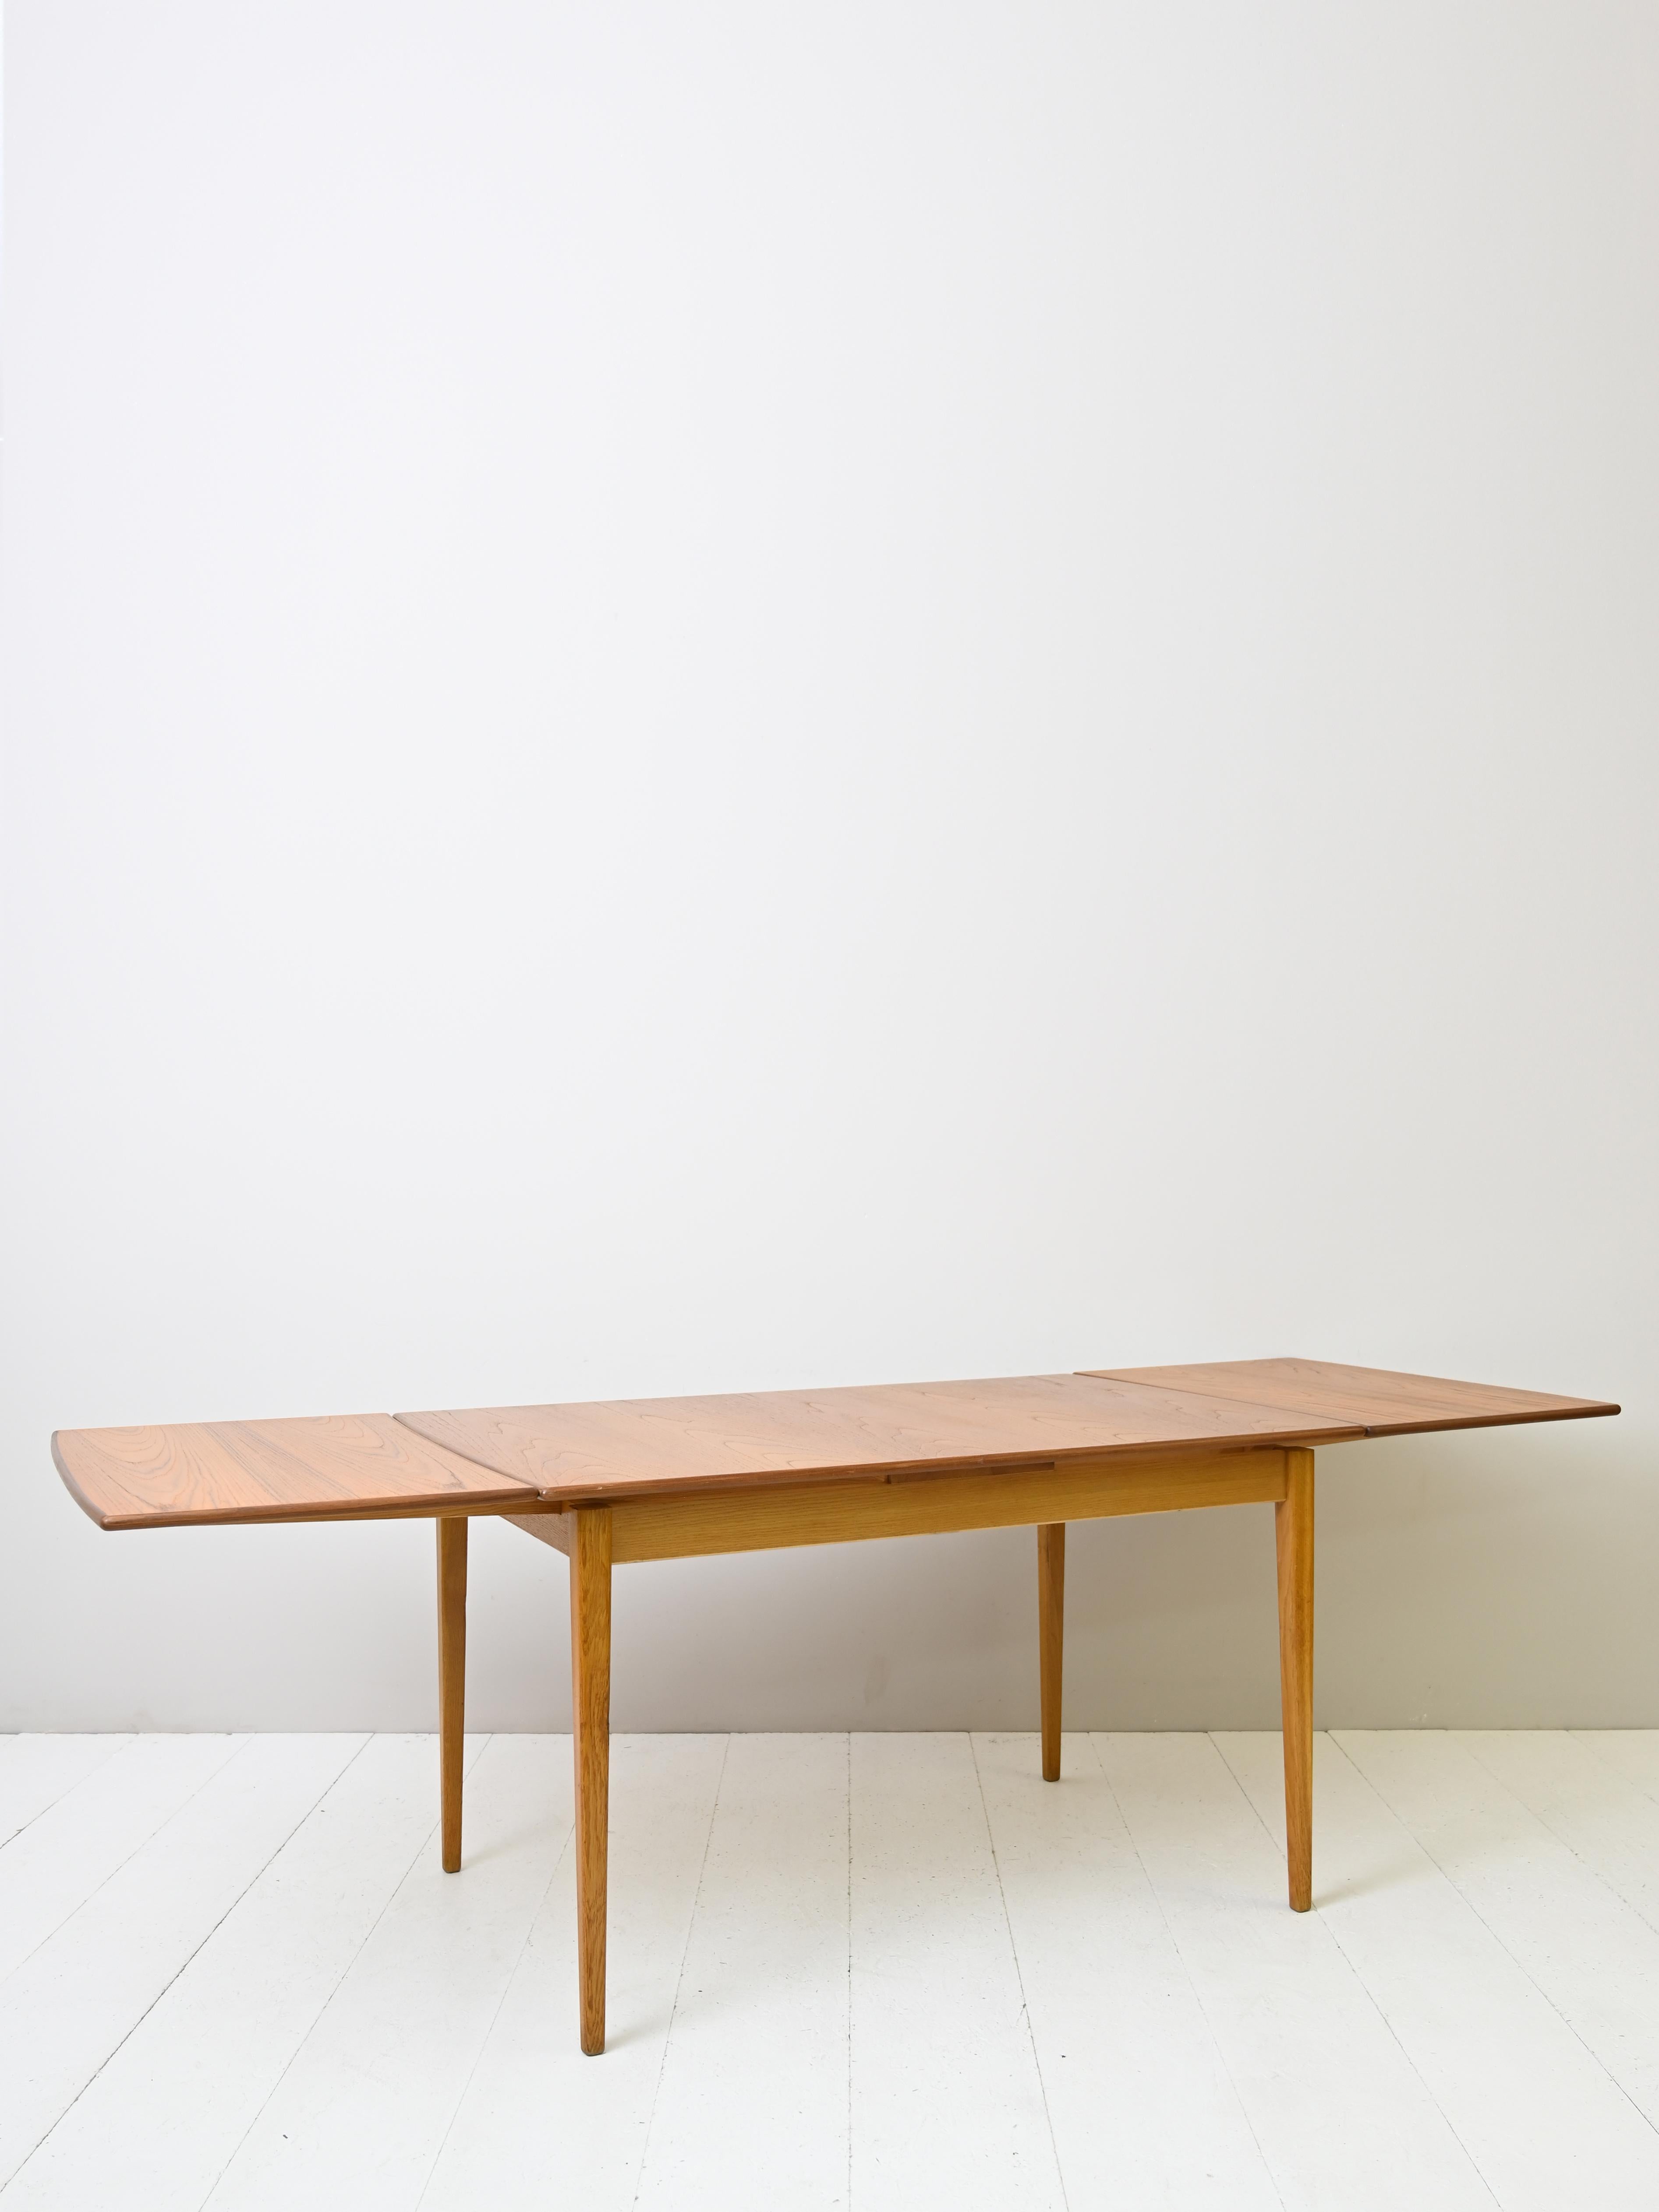 Vintage extendable rectangular table.
Swedish-made dining table with two extendable wings. 
Refined details and elegant lines are the distinguishing features of this original piece of furniture from the 1960s. 
Uncompromising functionality thanks